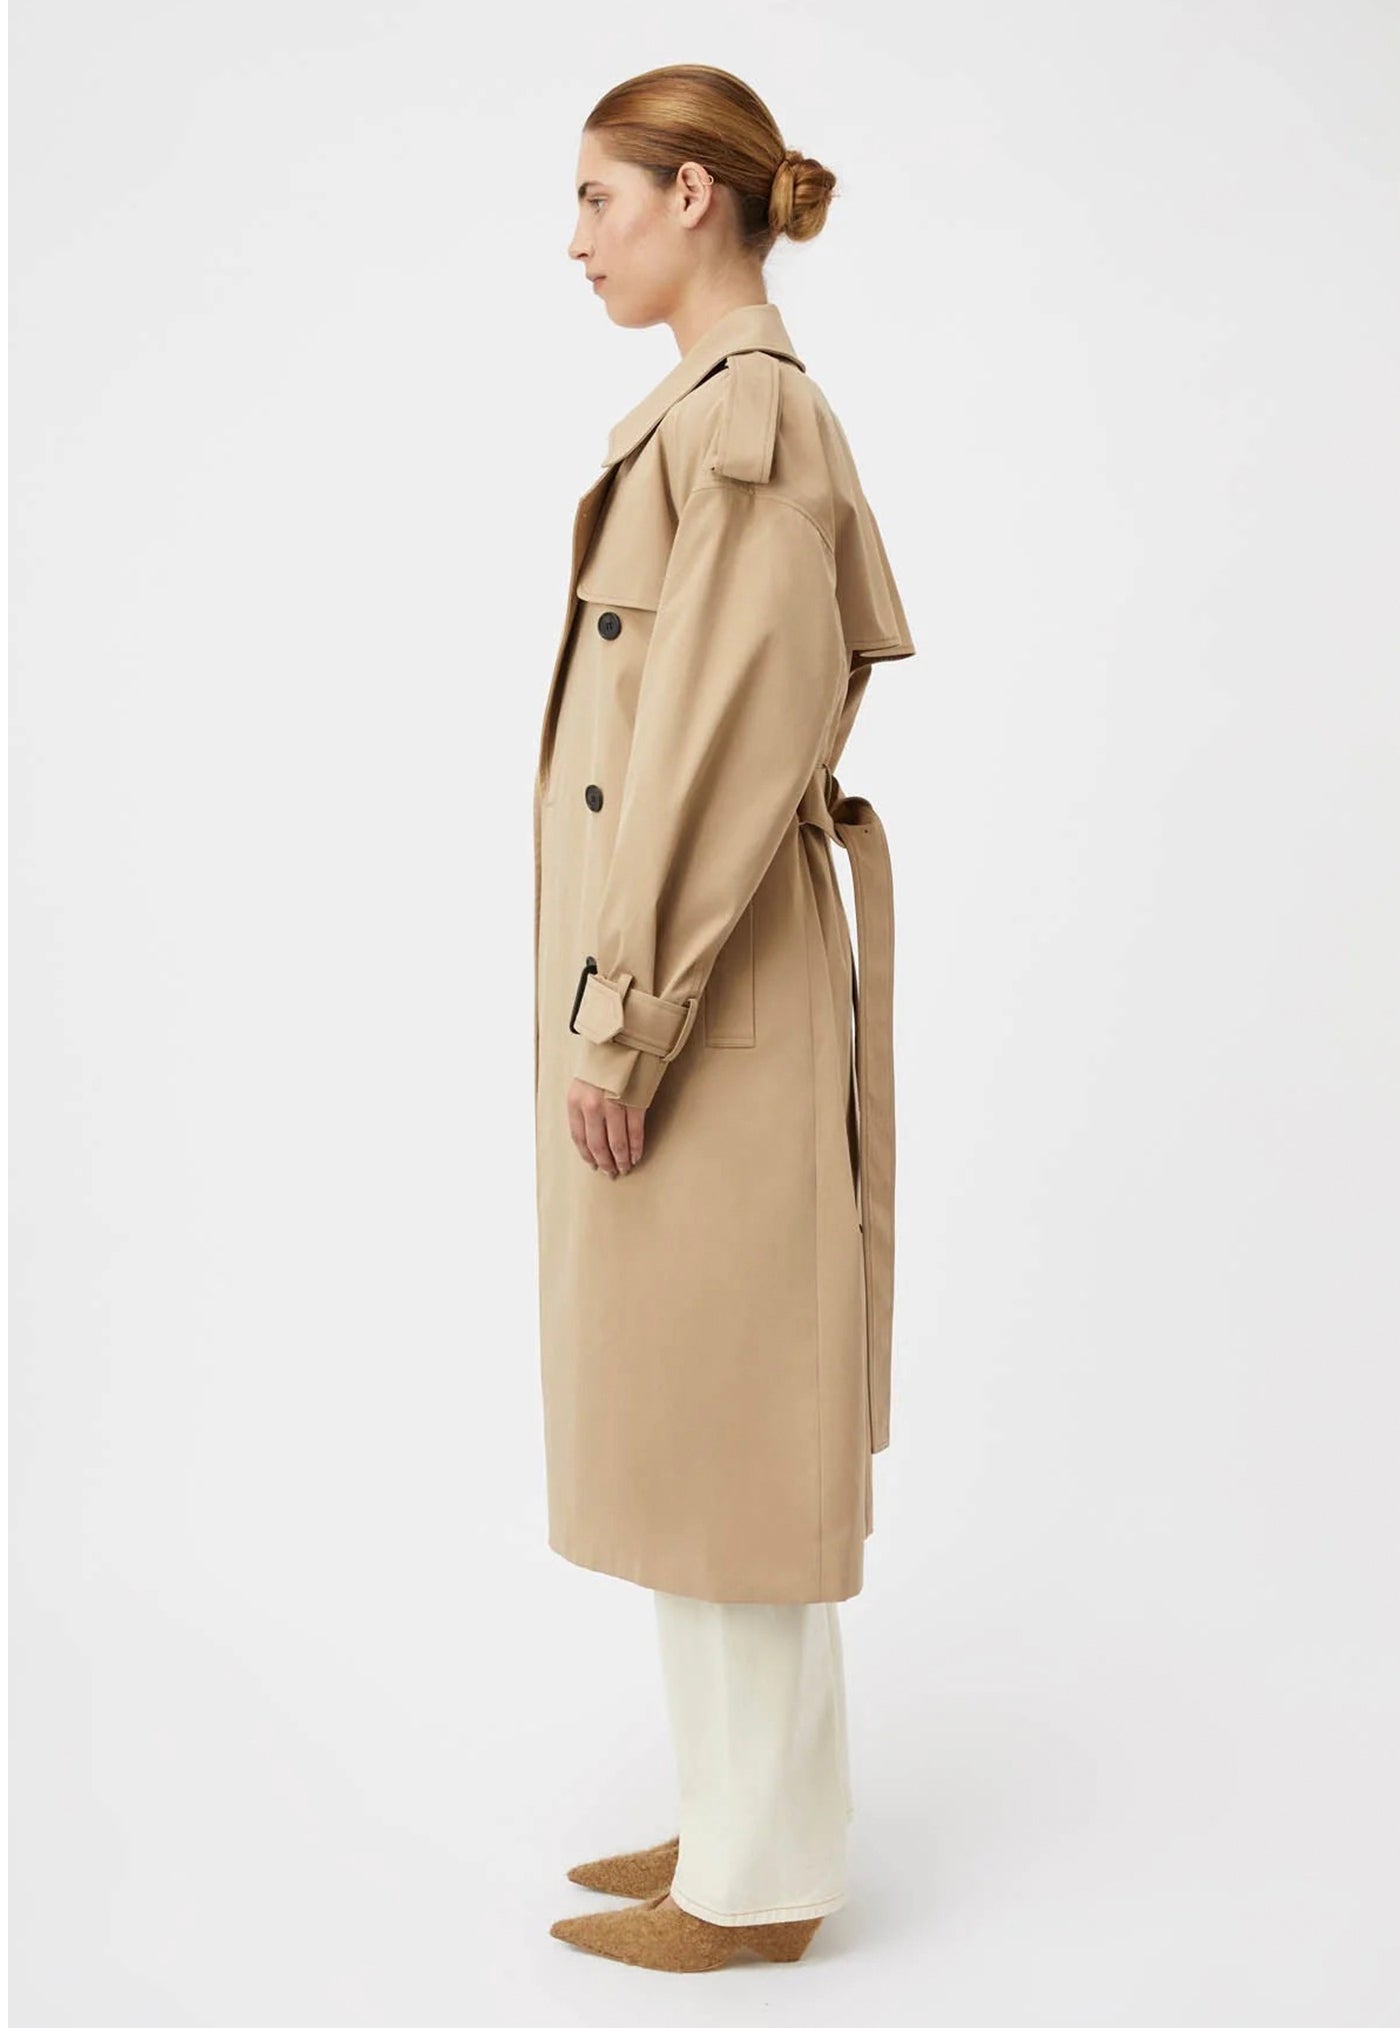 Evans Mid Length Trench Coat - Sand sold by Angel Divine